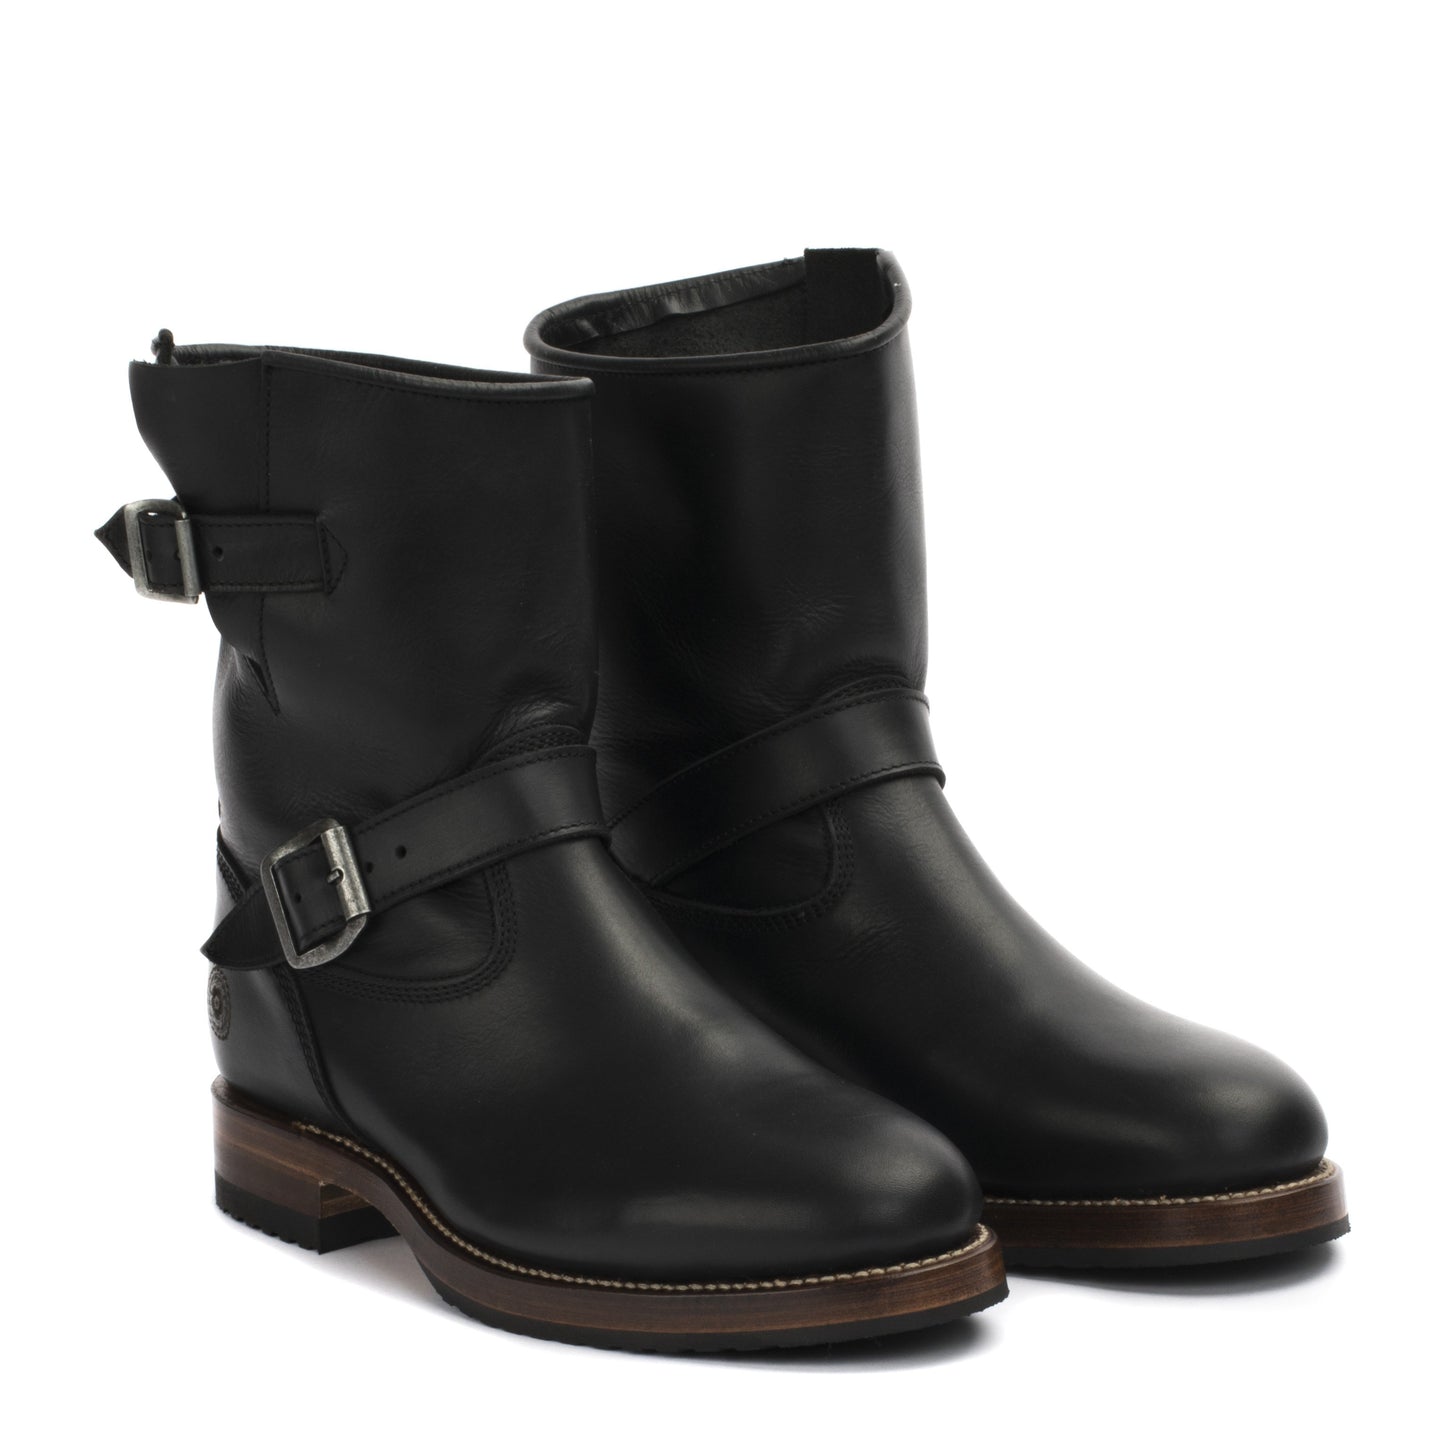 Mens Linesman Boot Black - Classic Engineer Boots - Ranch Road Boots™ Front Side View